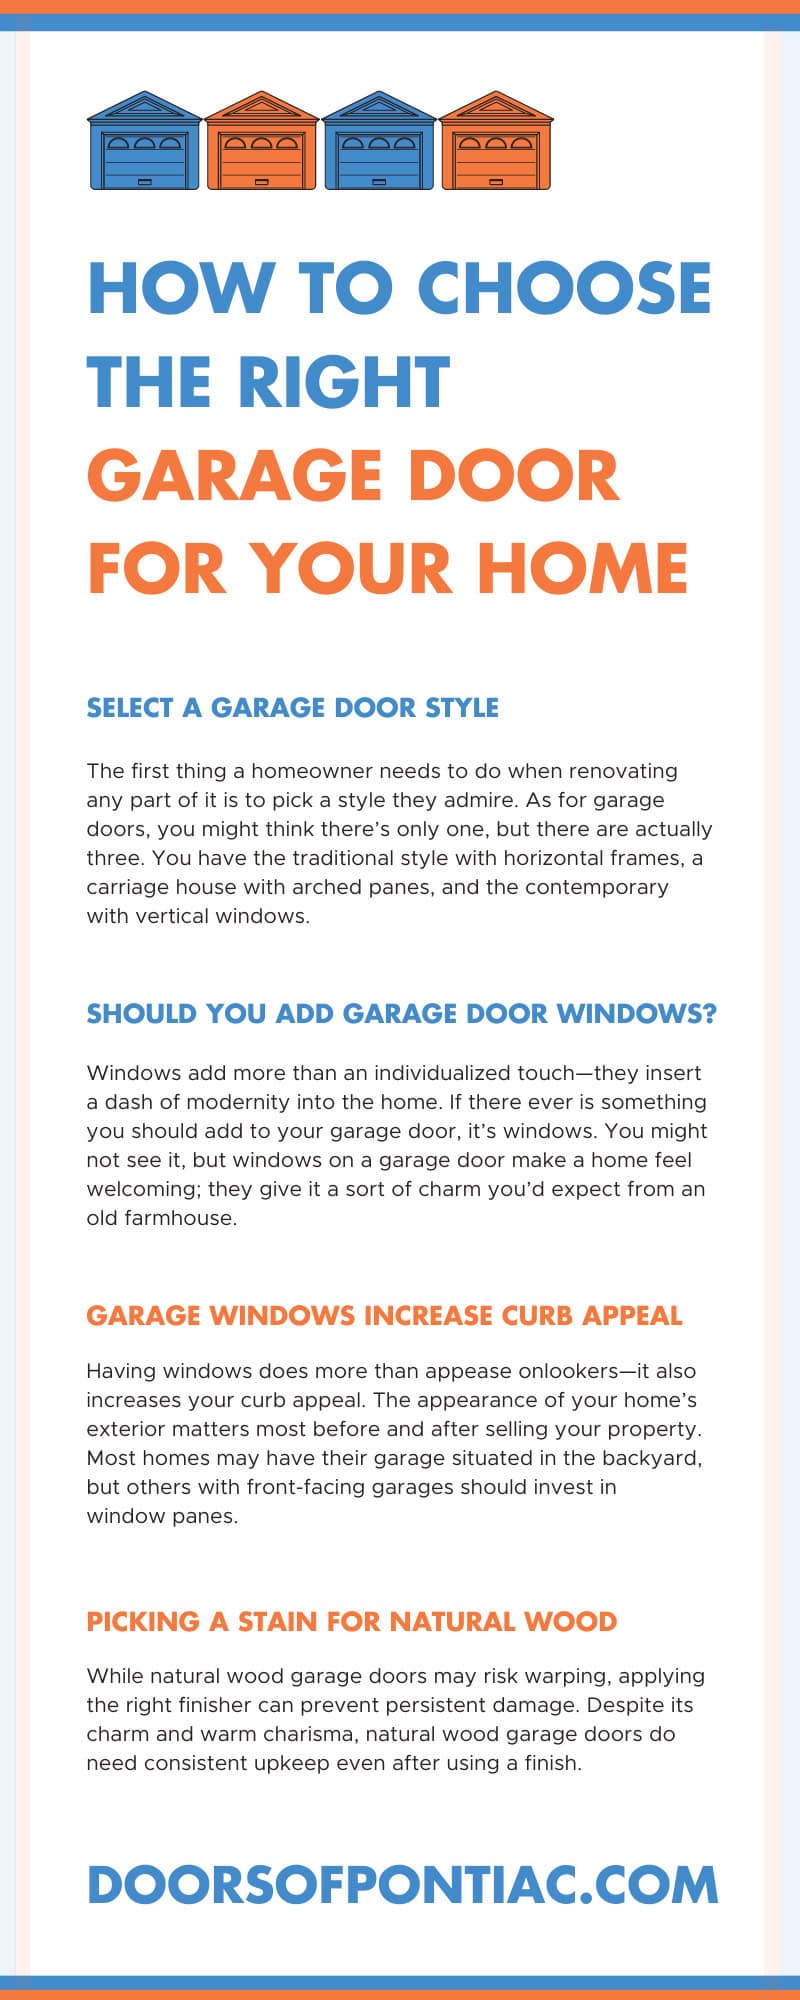 How To Choose the Right Garage Door for Your Home